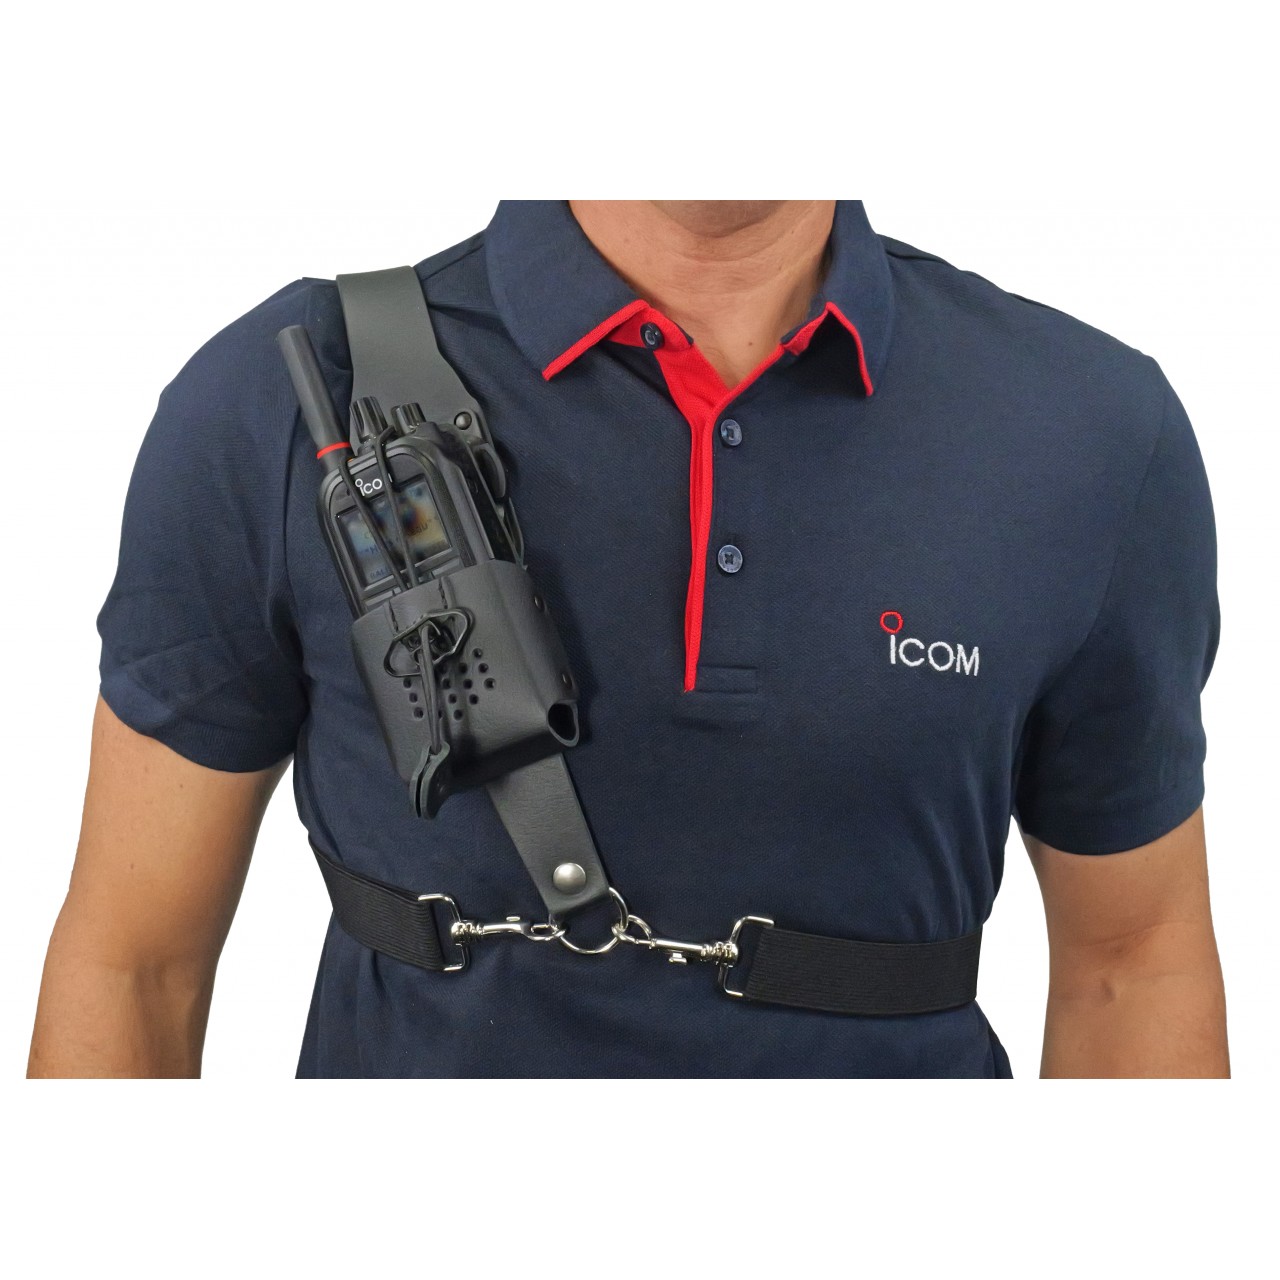 LC-OTUNICUIR-XL Covers, fasteners and cradles - ICOM